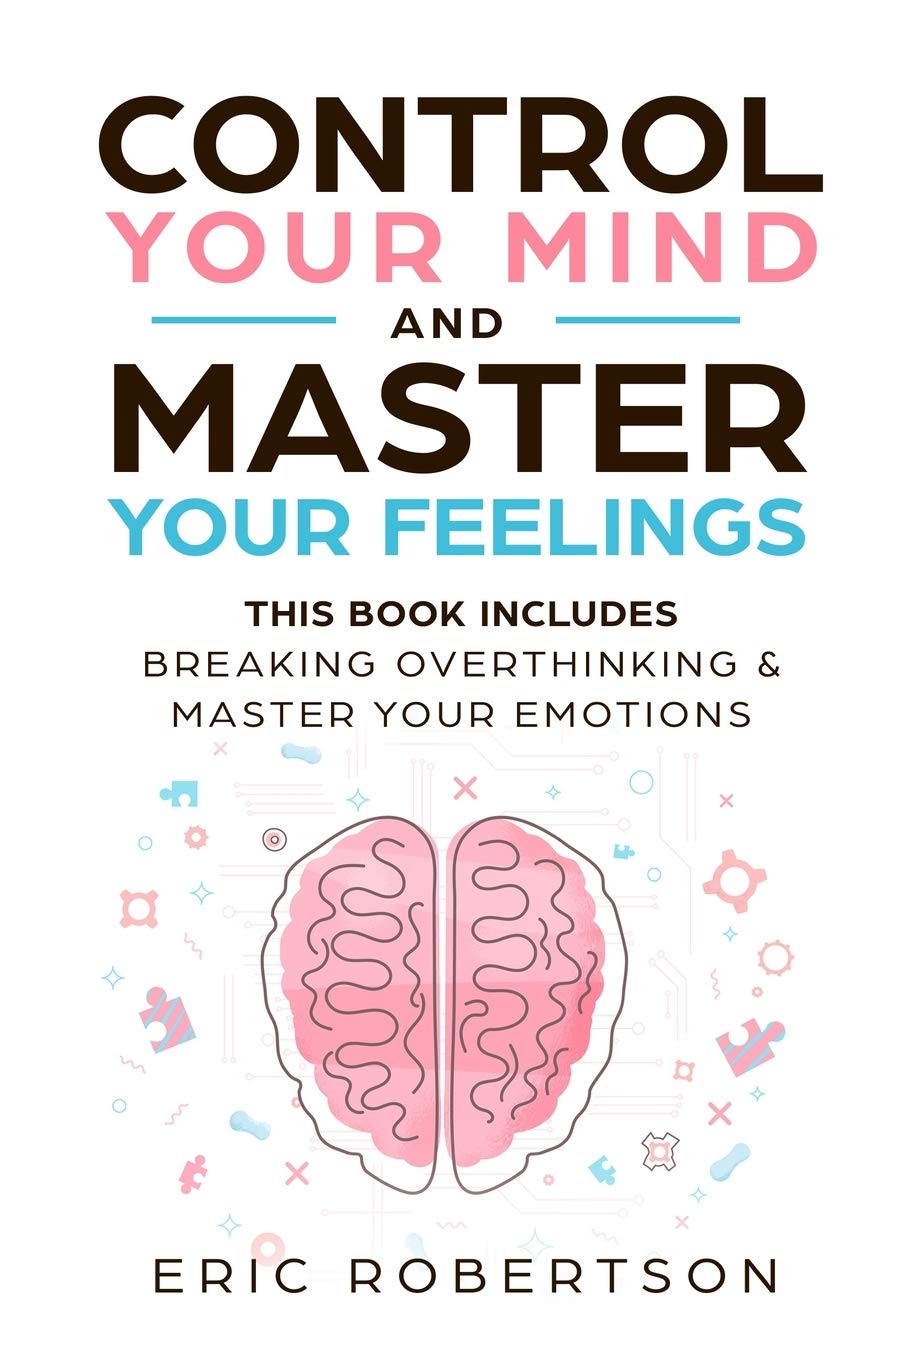 Control Your Mind and Master Your Feelings by Eric Robertson